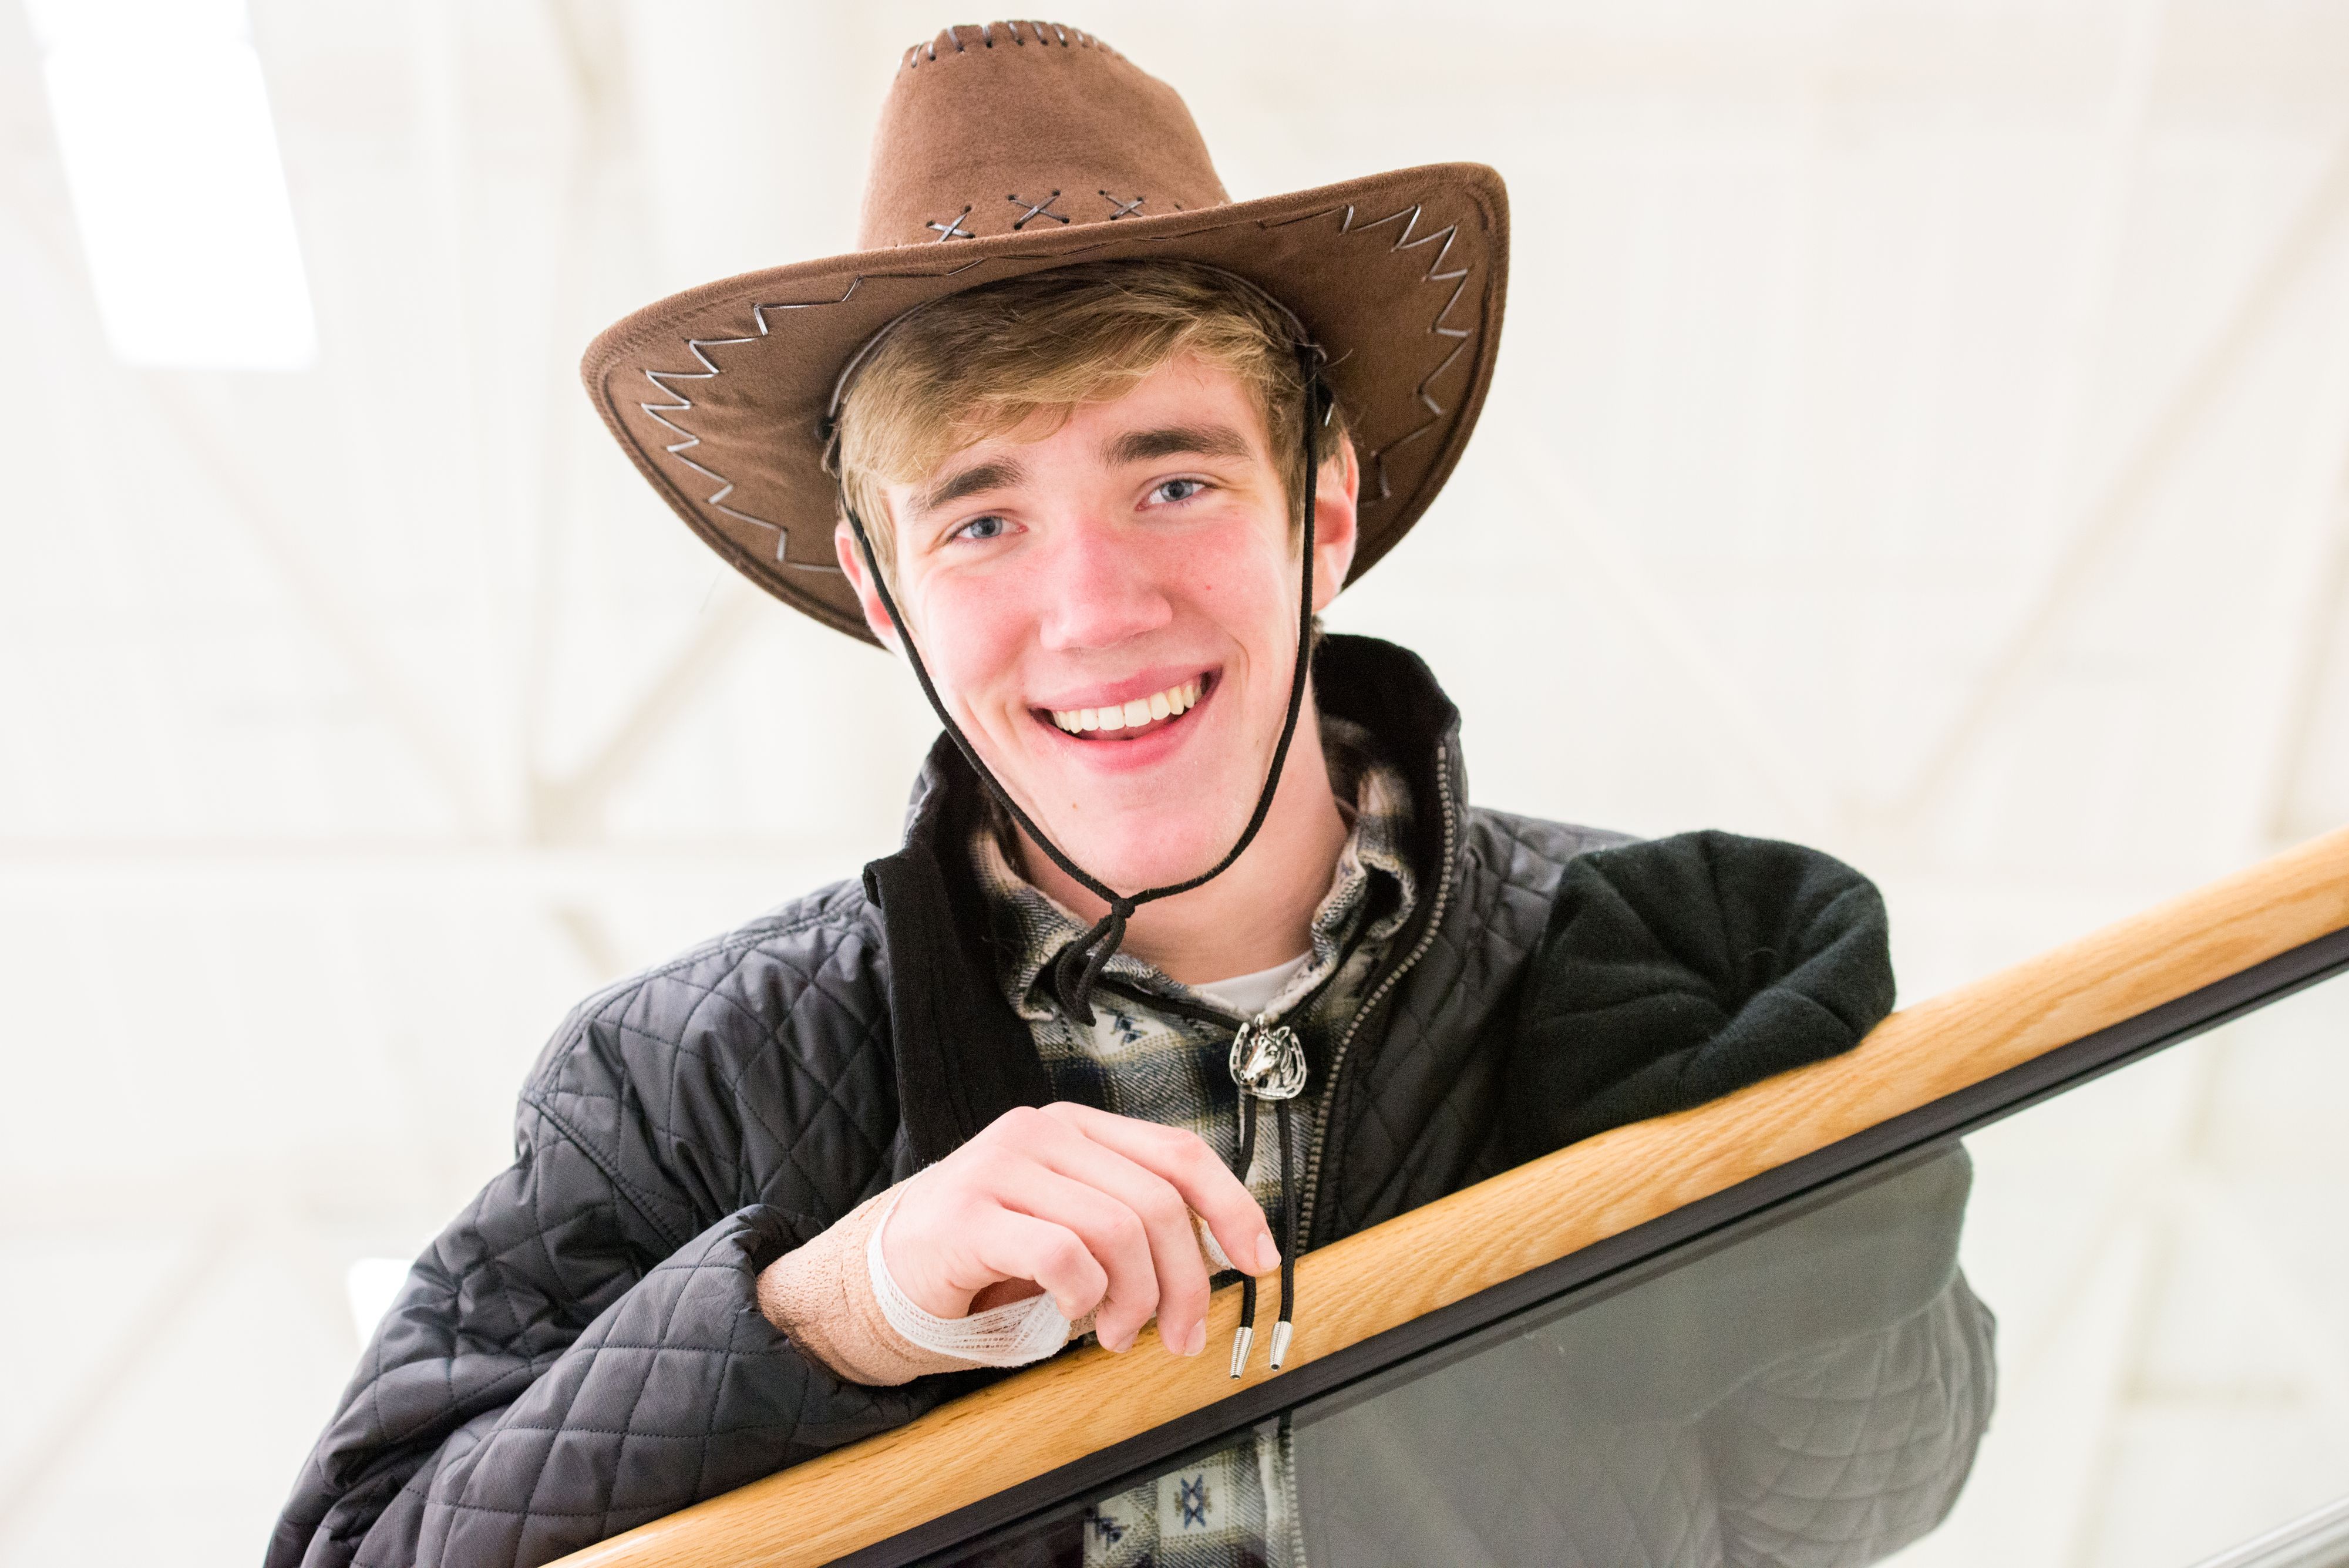 Male high school student wearing black quilted jacket and cowboy hat leaning on railing with smile